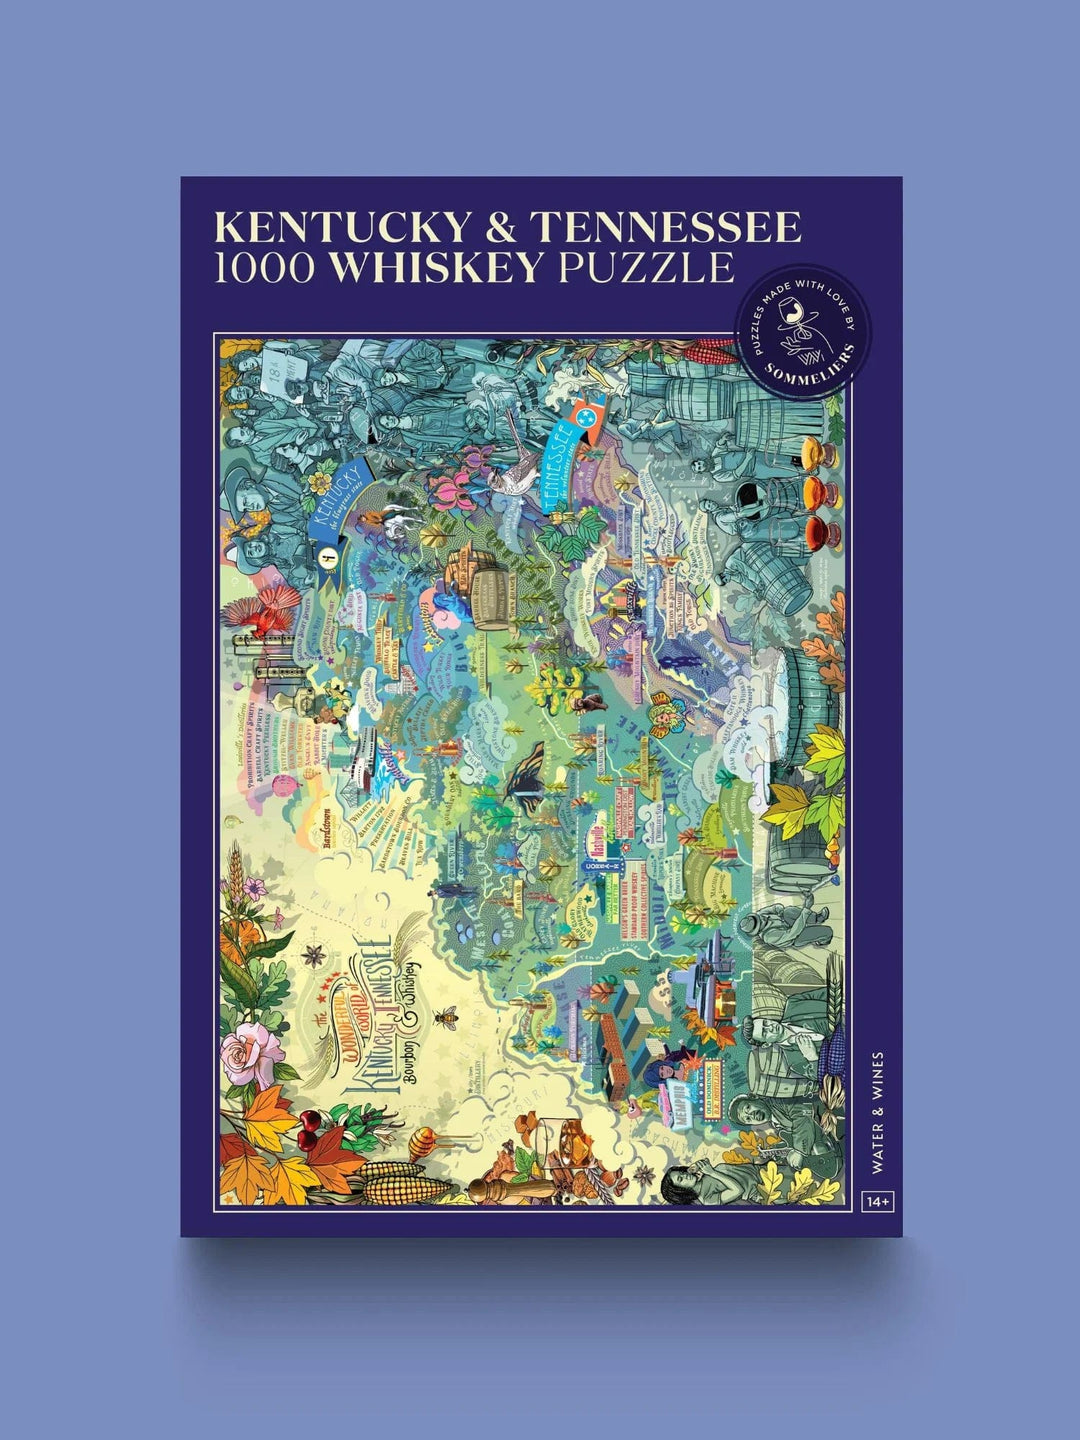 In this photo Whisky Puzzle Kentucky & Tennessee - 1000 pieces - 14+ - Water & Wines Sweden Mood4whisky